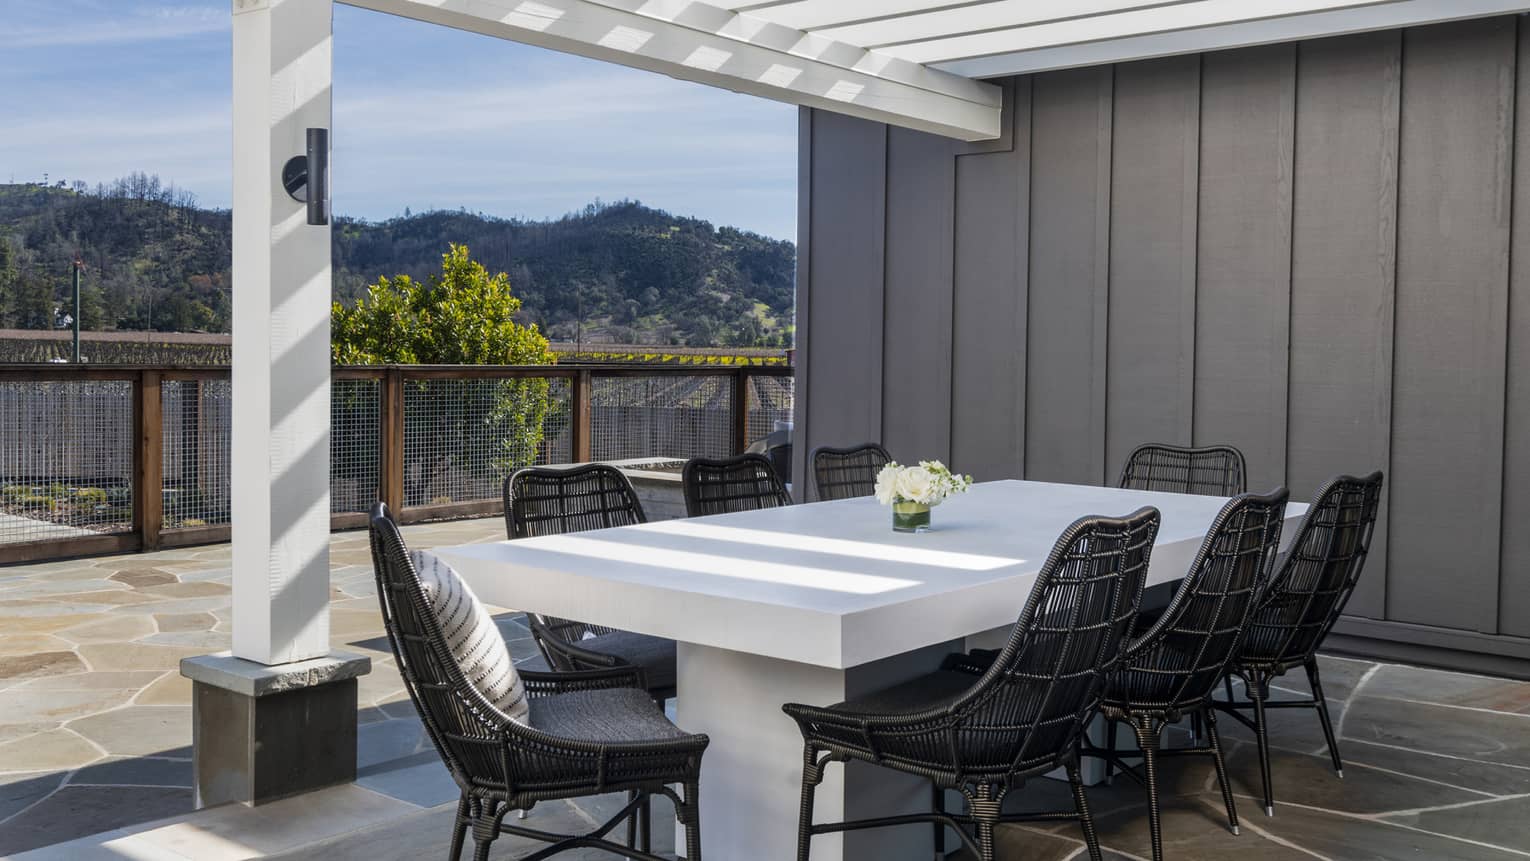 Dining table for 8 on stone patio under a white pergola